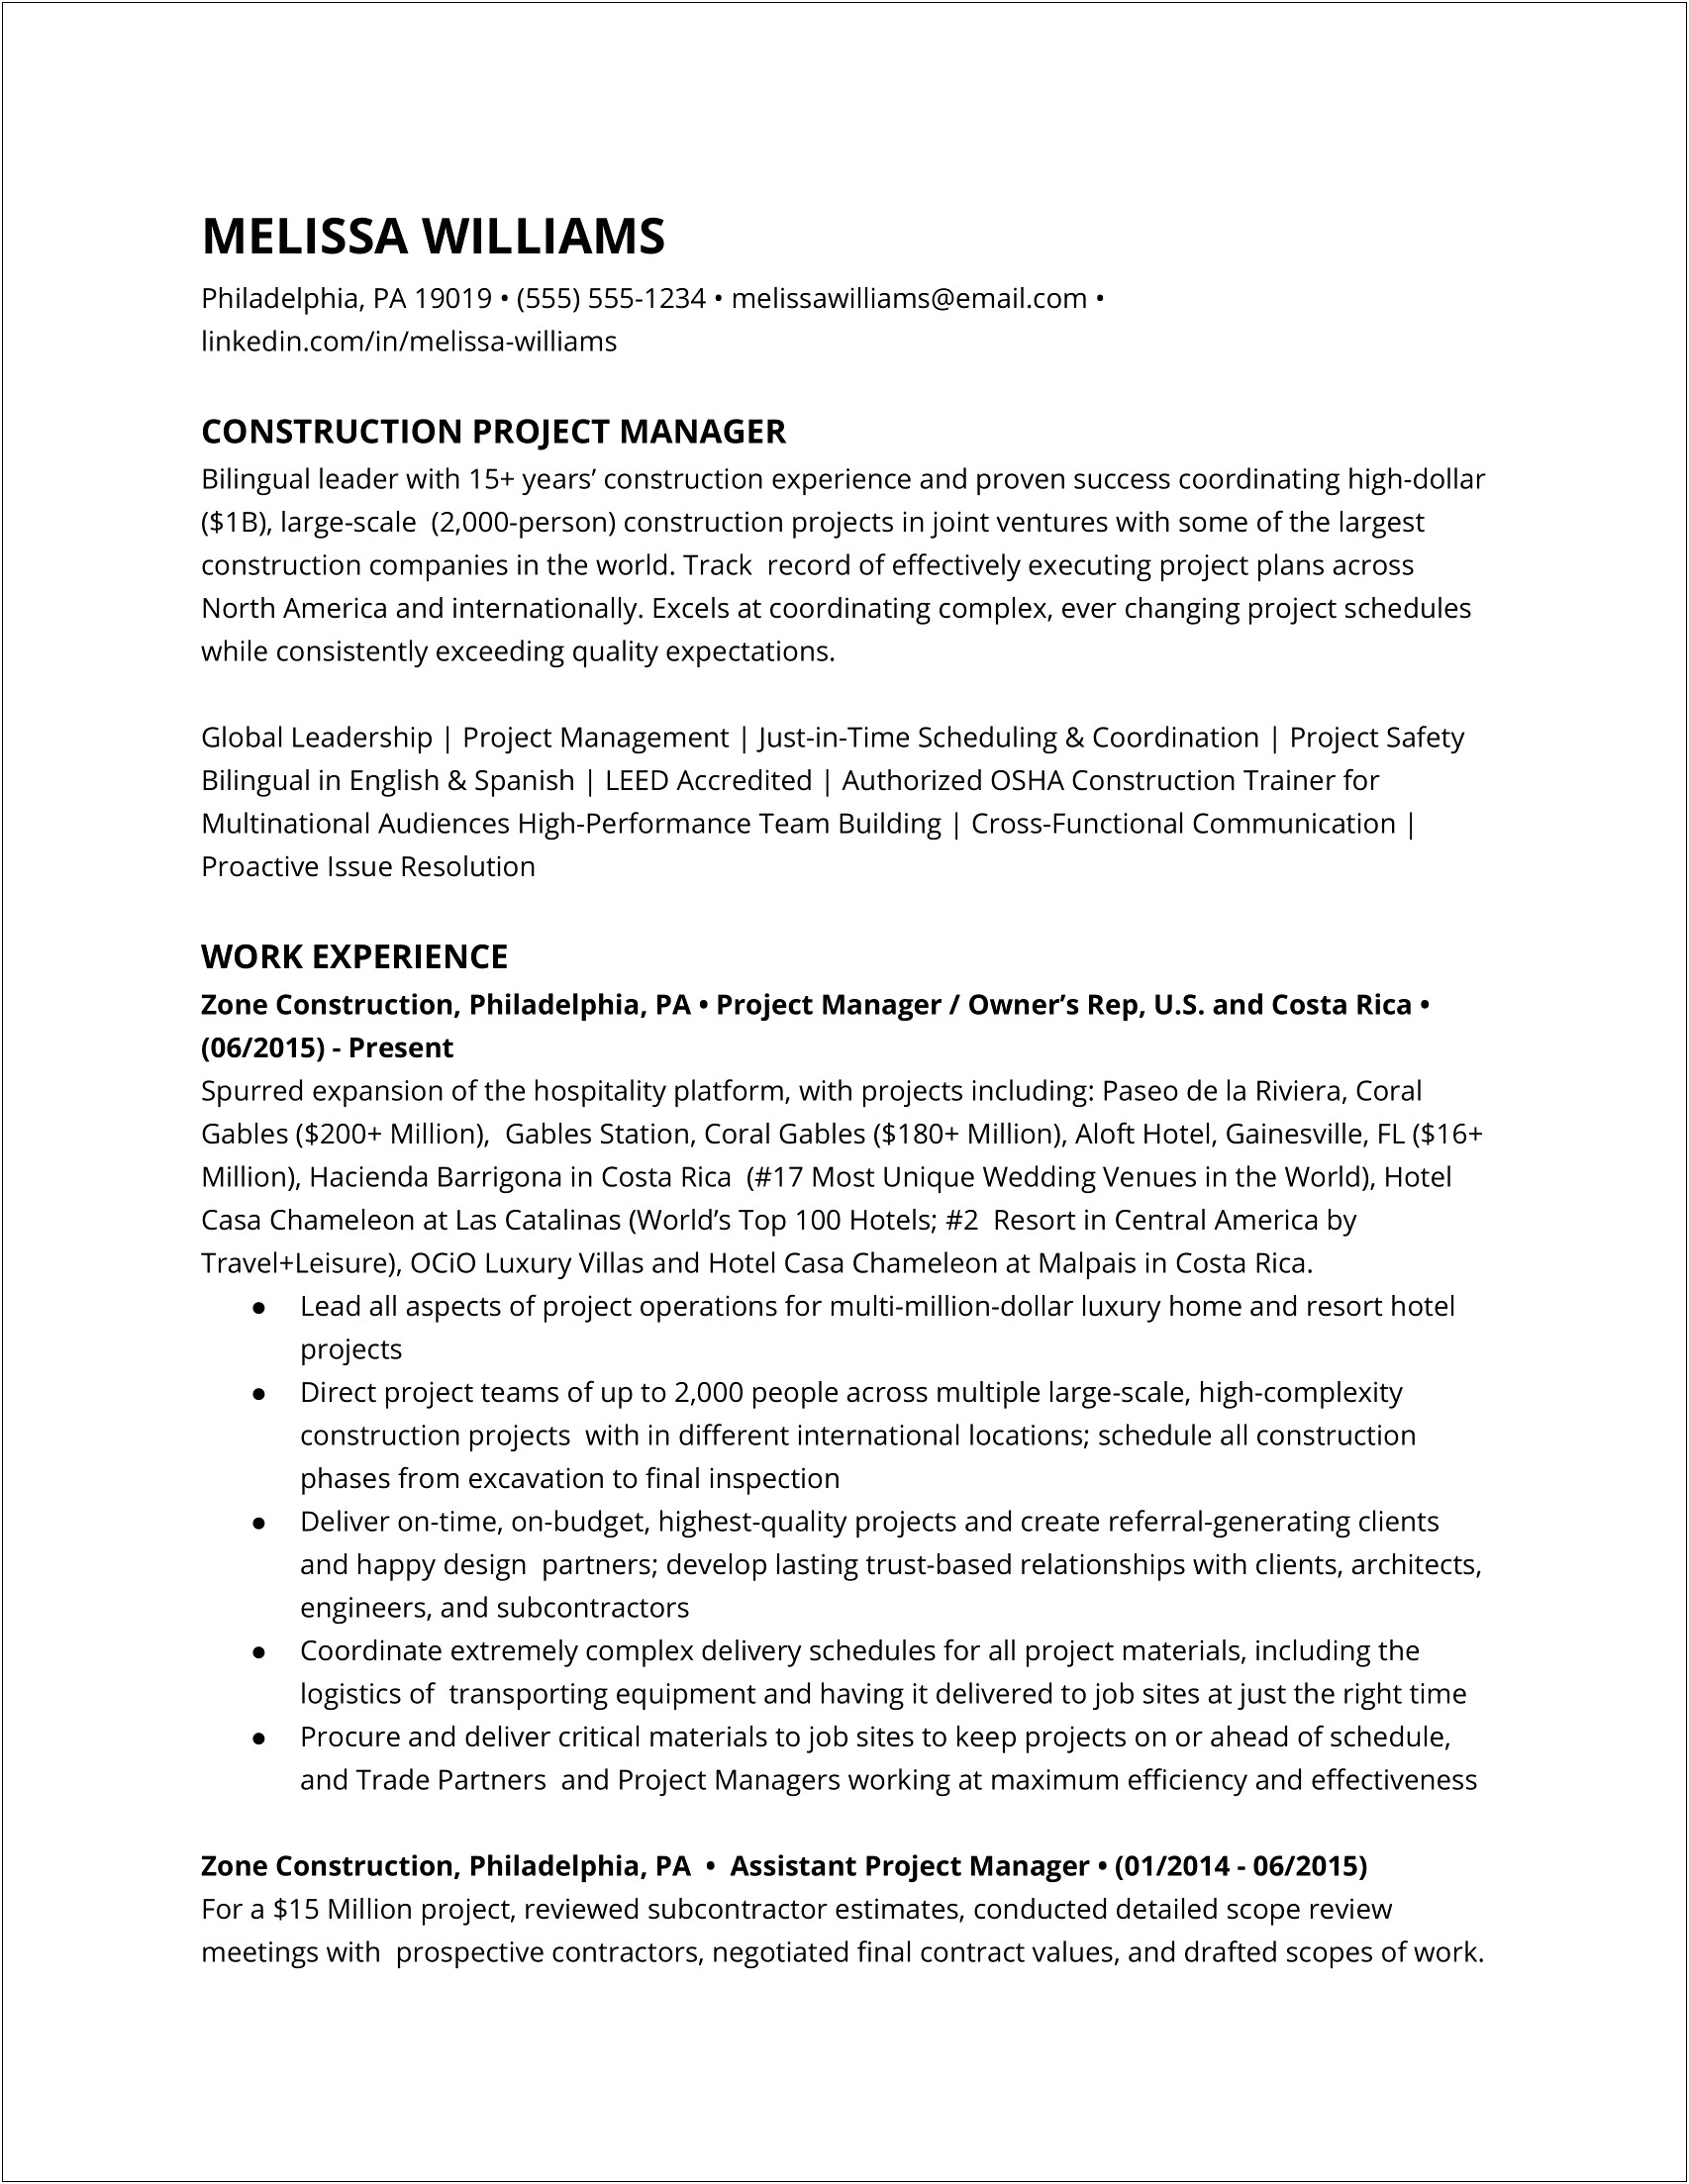 Resume Description For Project Manager Assistant